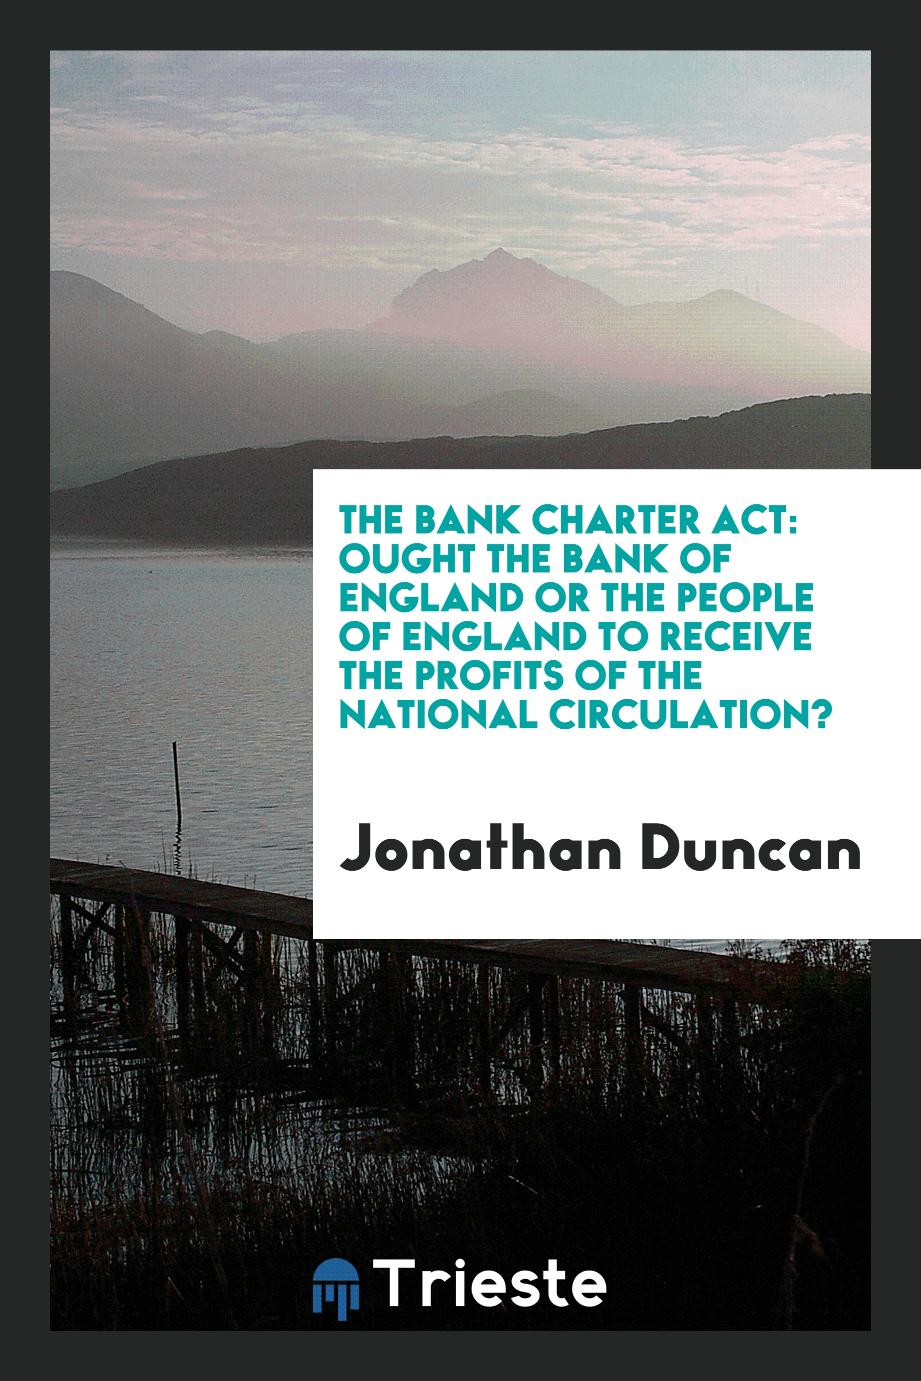 The Bank Charter Act: ought the Bank of England or the people of England to receive the profits of the national circulation?